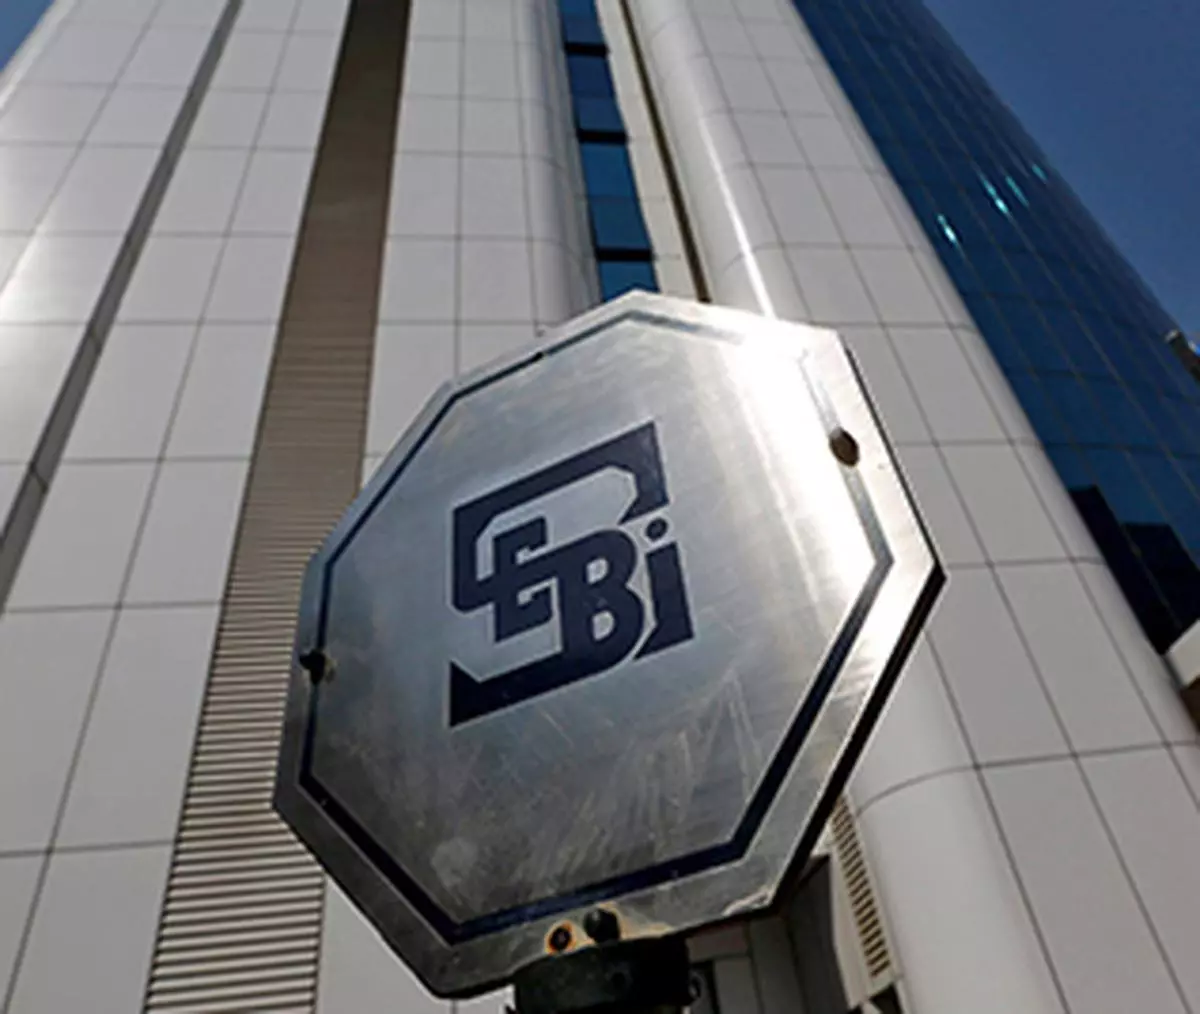 The logo of the Securities and Exchange Board of India (SEBI) 